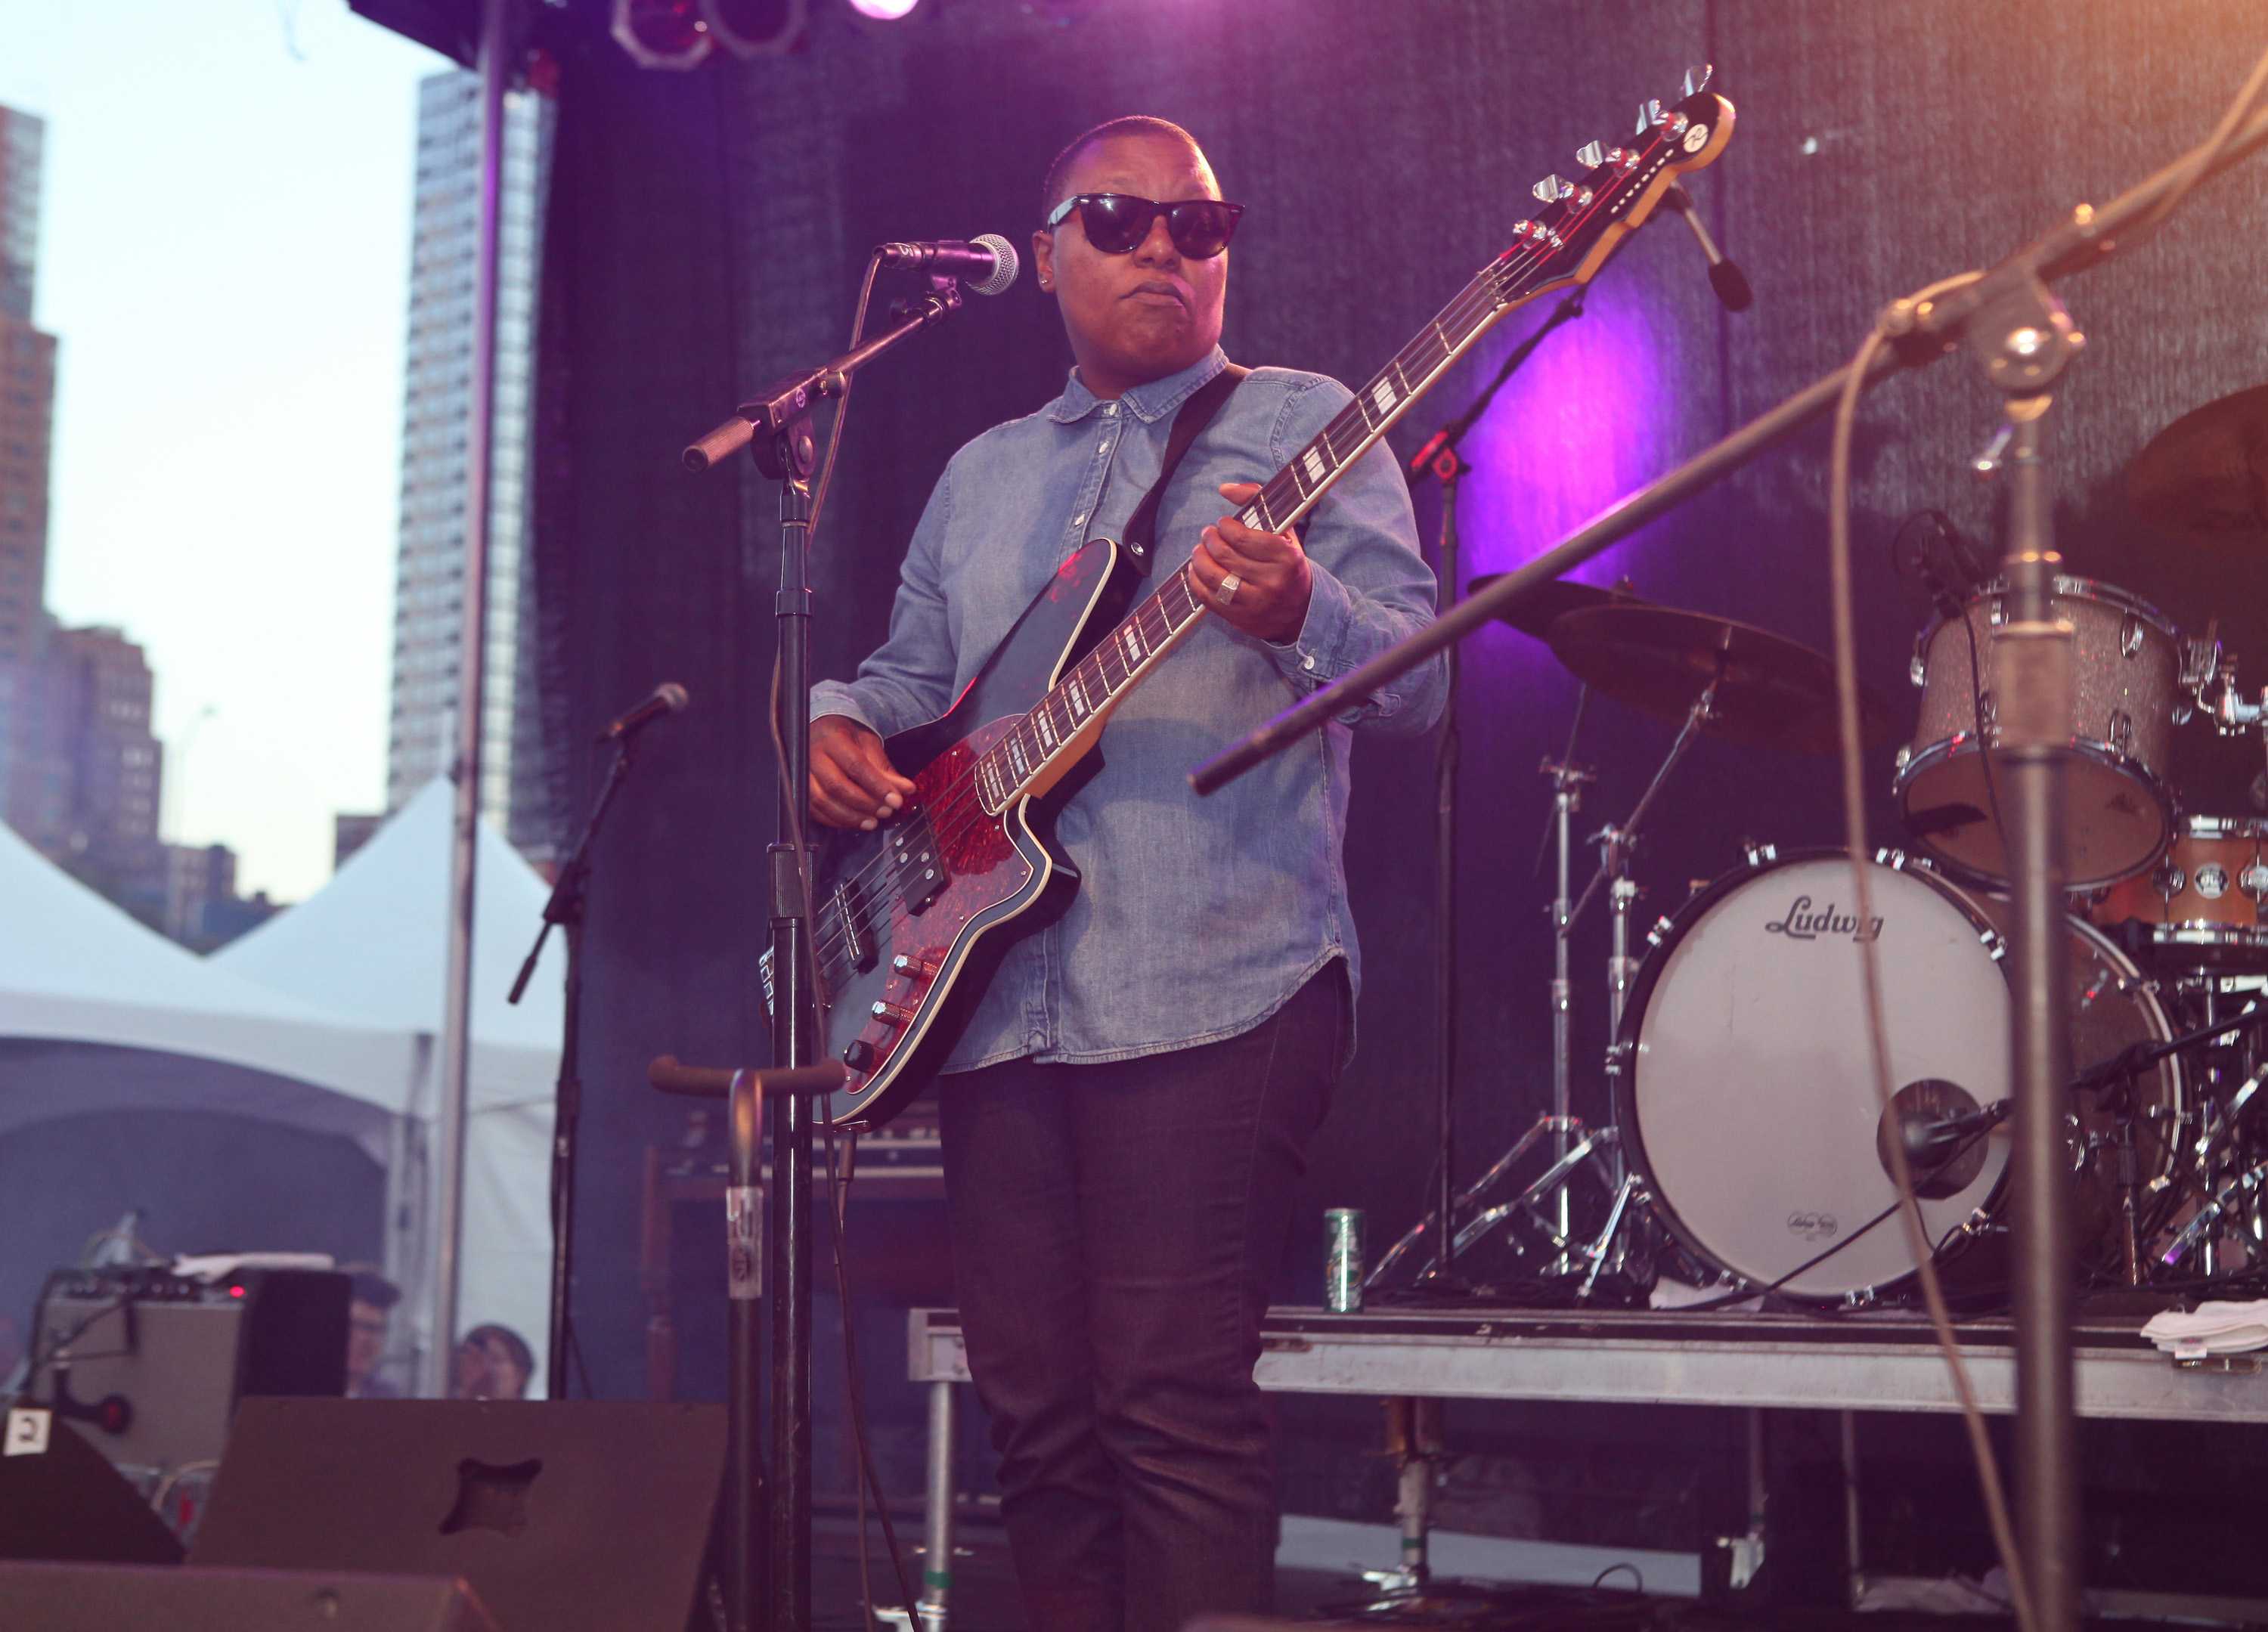 Meshell Ndegeocello playing the bass on stage with a microphone stand in front of him.